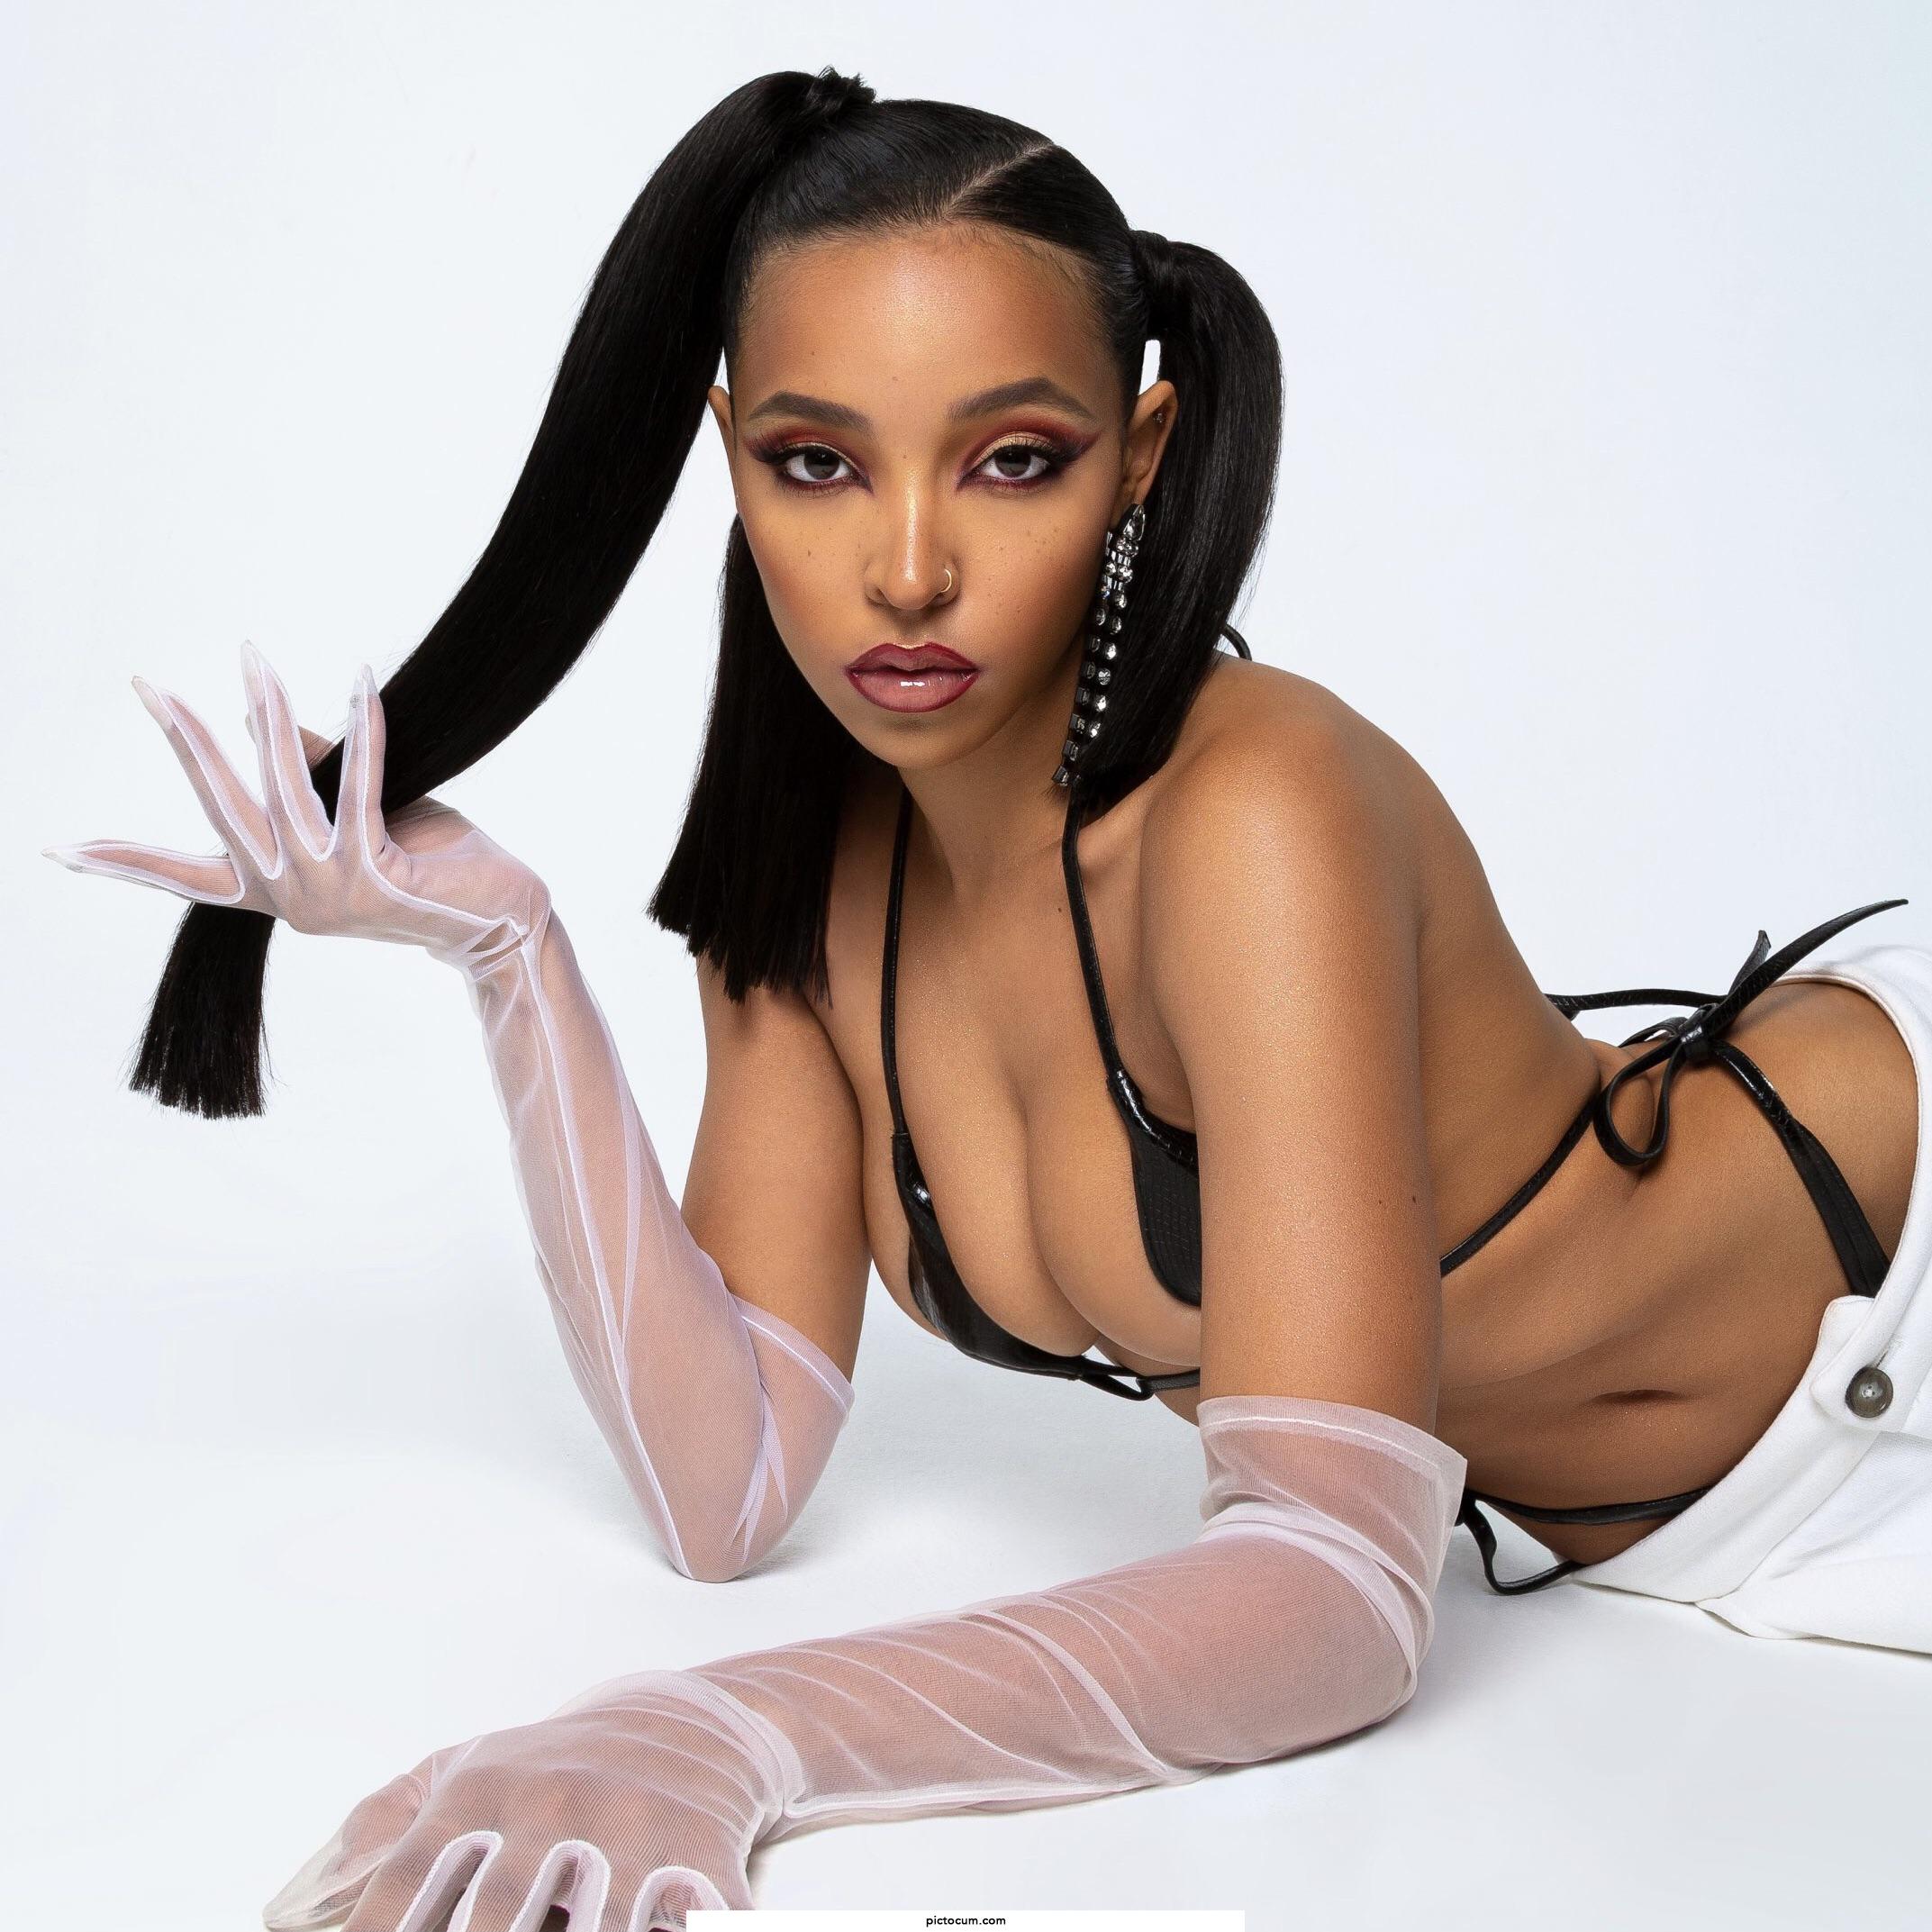 Tinashe is underrated. Anyone wanna talk about how hot this bitch is.